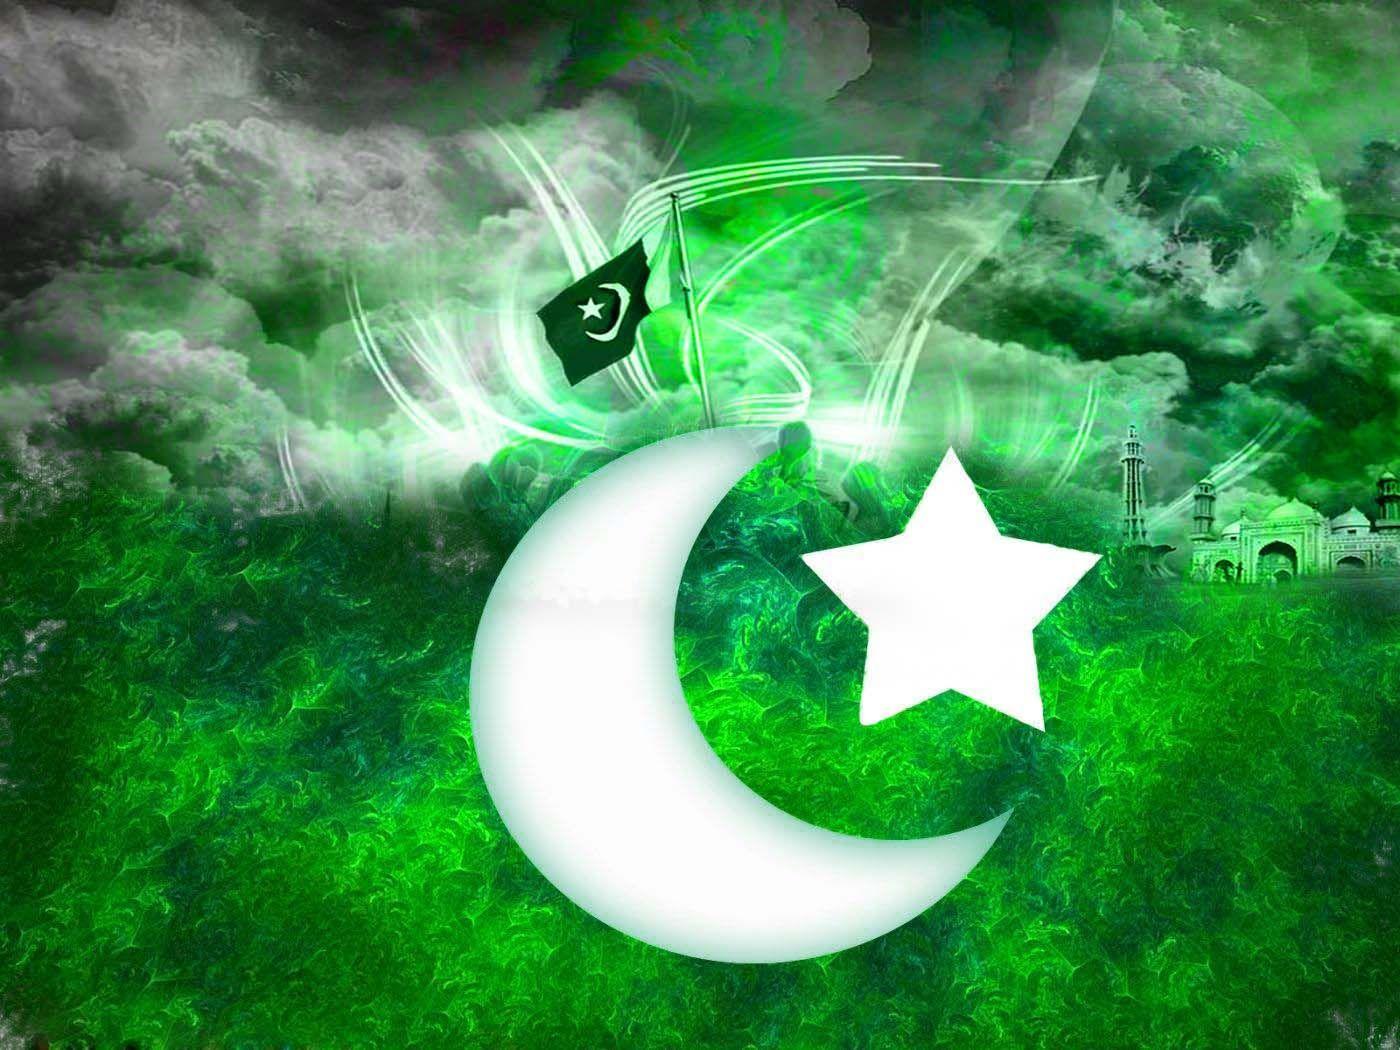 August HD Wallpaper For Timeline. Independence day wallpaper, Pakistan wallpaper, Pakistan independence day